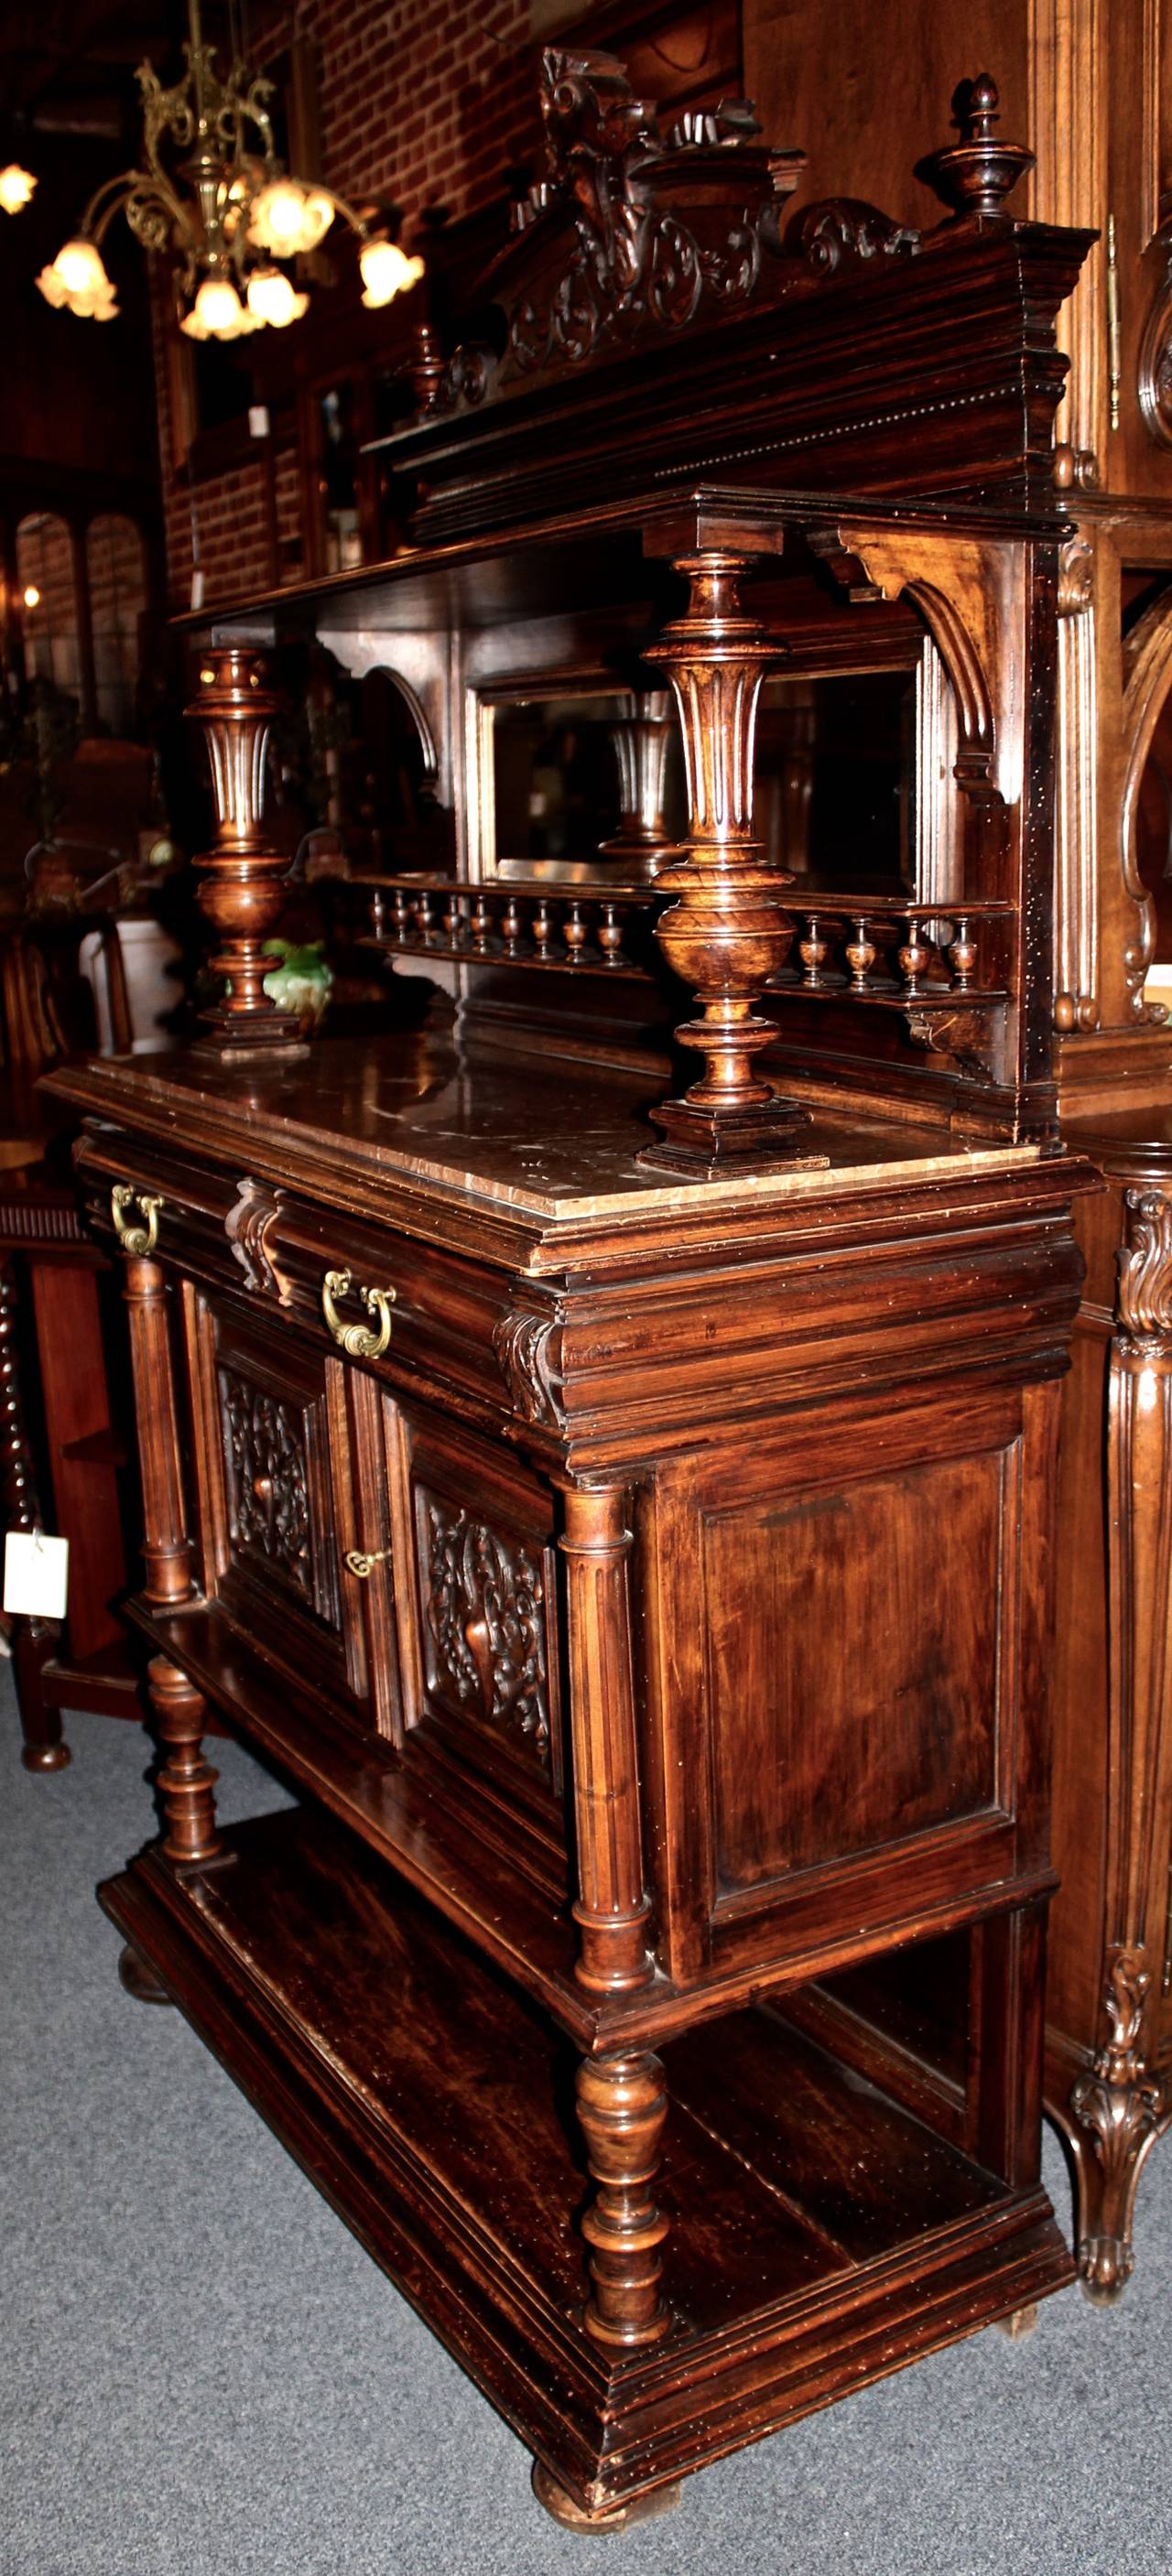 This French server is made in the Henry II style from walnut.  The piece is ornately carved with details suggestive of the style.  It features a marble top with a mirror above it.  Storage includes two pull-out drawers, two swing doors with